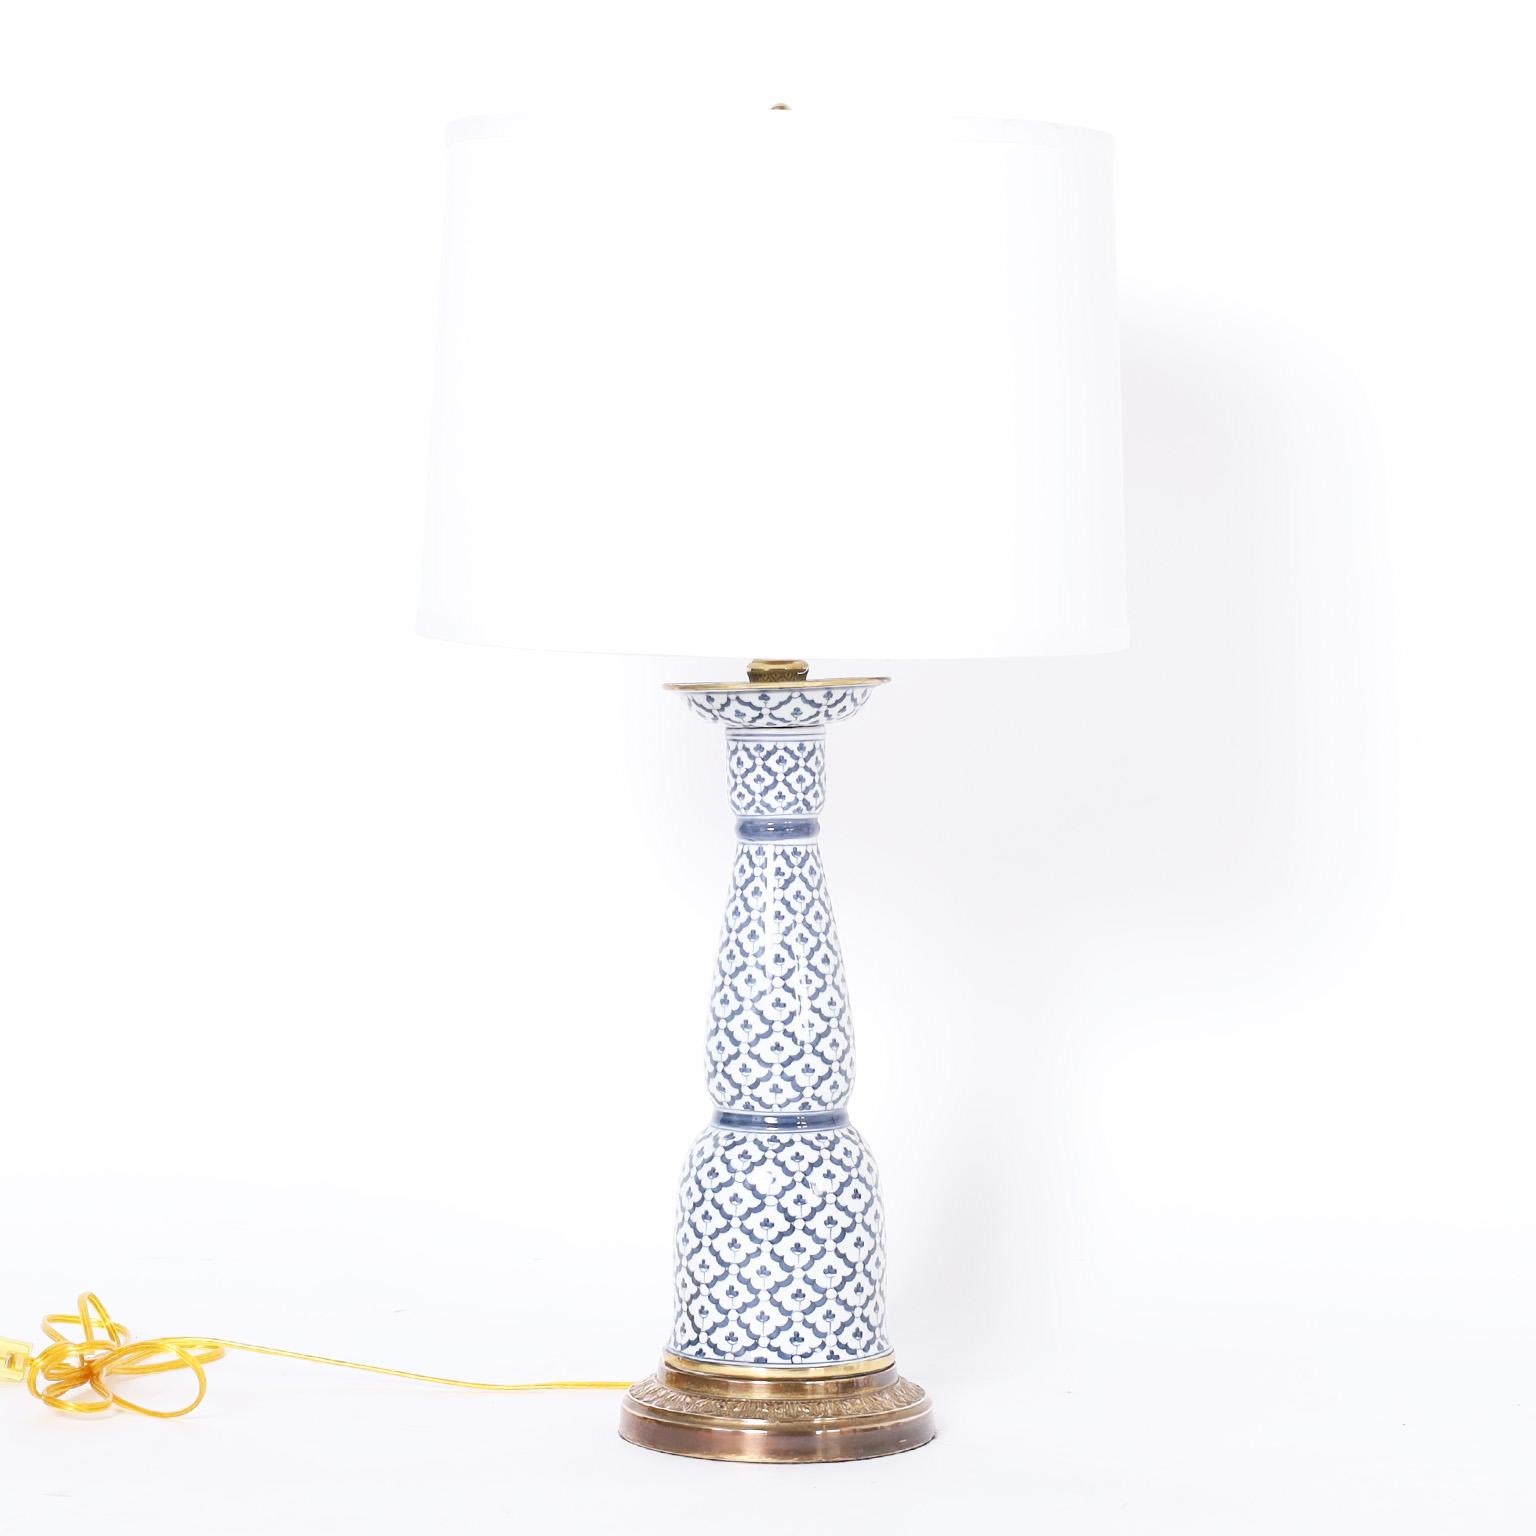 Asian modern pair of table lamps handcrafted in porcelain and decorated with blue and white over a classic chinoiserie form. Signed Maitland-Smith on the bottoms.